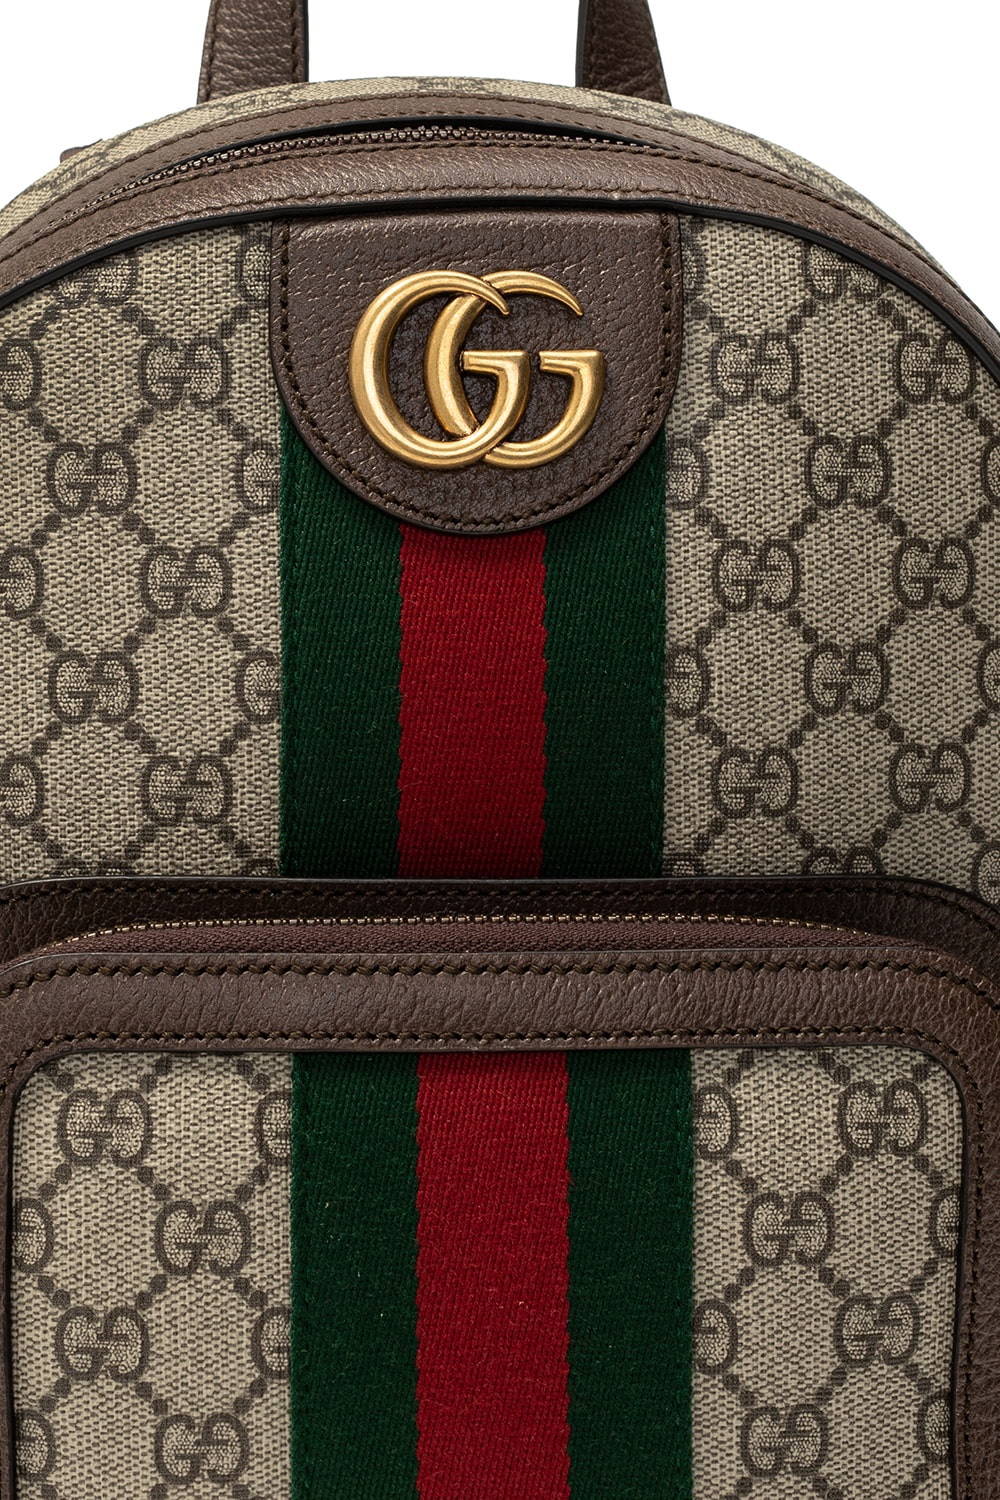 BALO UNISEX GUCCI OPHIDIA GG SMALL BACKPACK 17